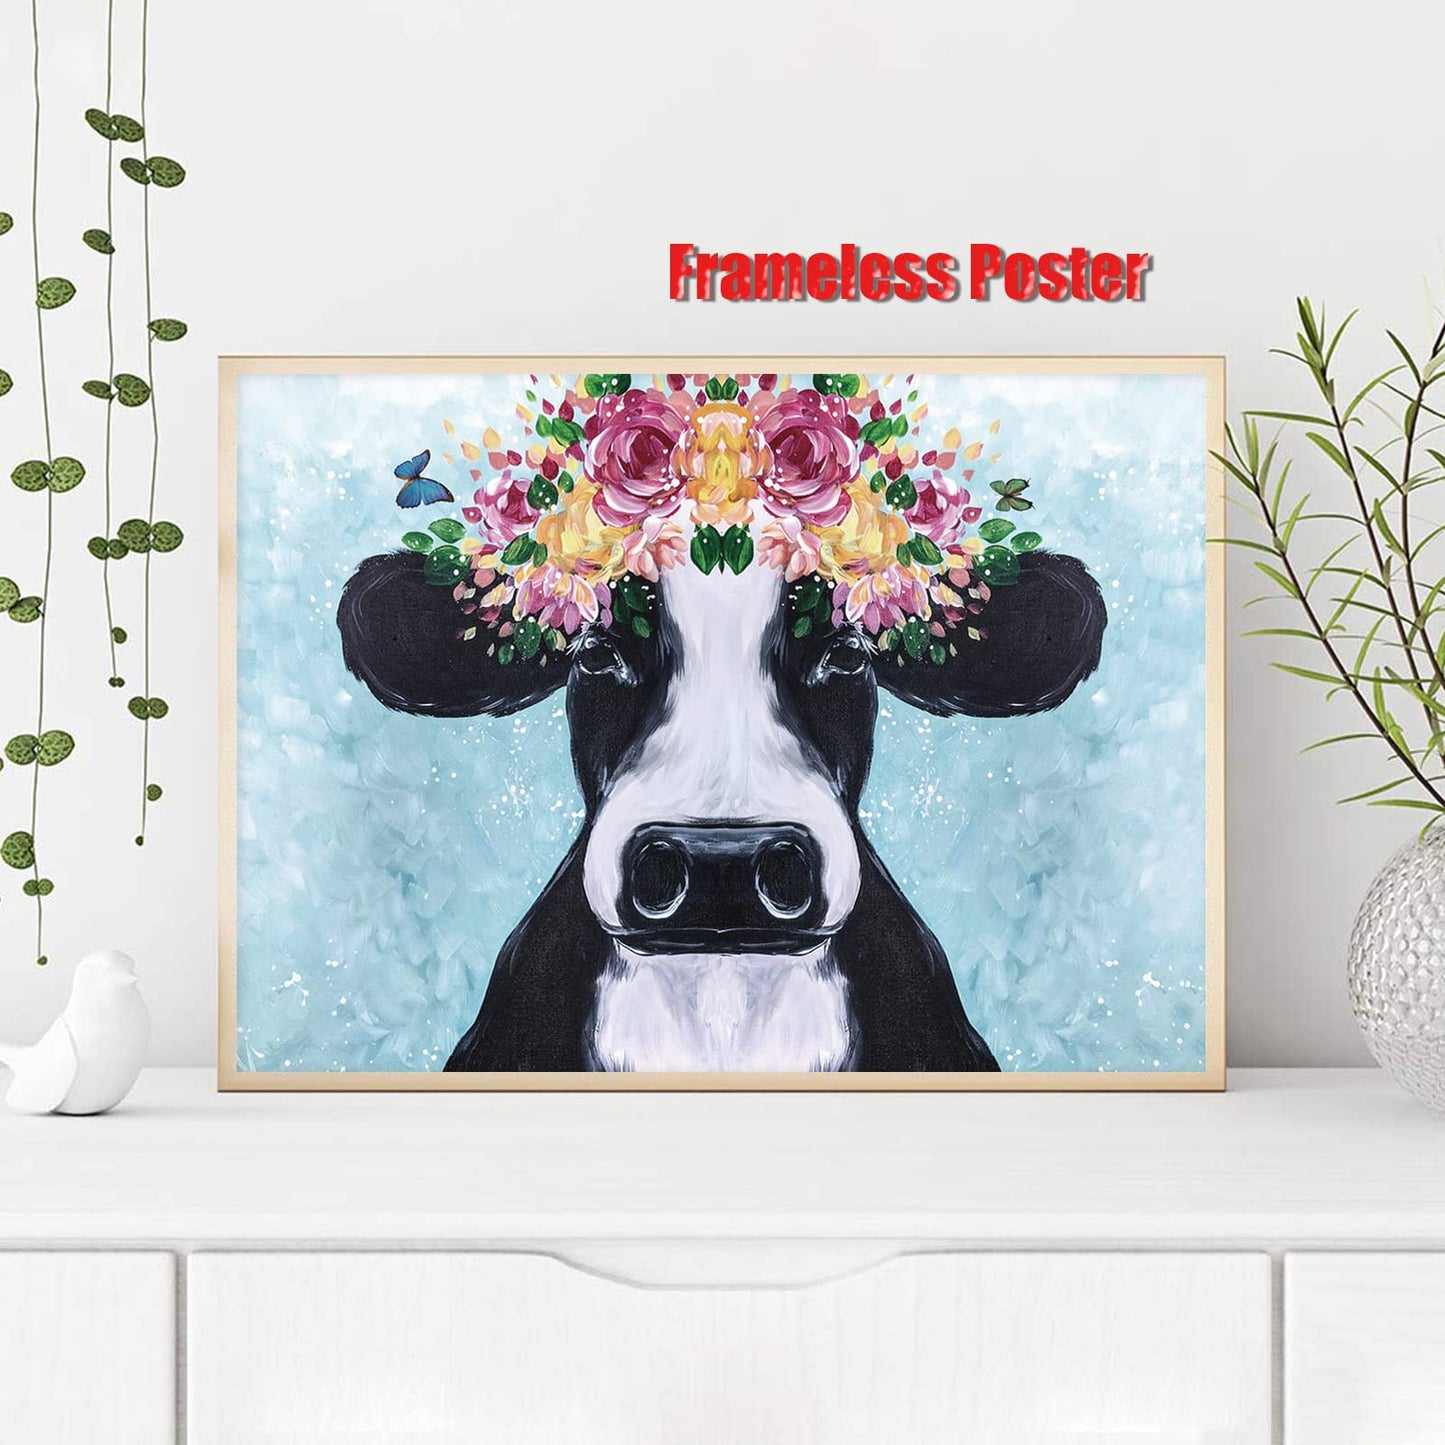 Modern Farmhouse Prints Colorful Cow Paintings Floral Cow Canvas Wall Decor Holstein Cow Poster Blue Cow Pictures Wall Decor Rustic Cow Art Flower Cow Painting Farm Animal Artwork 12x16inch Frameless